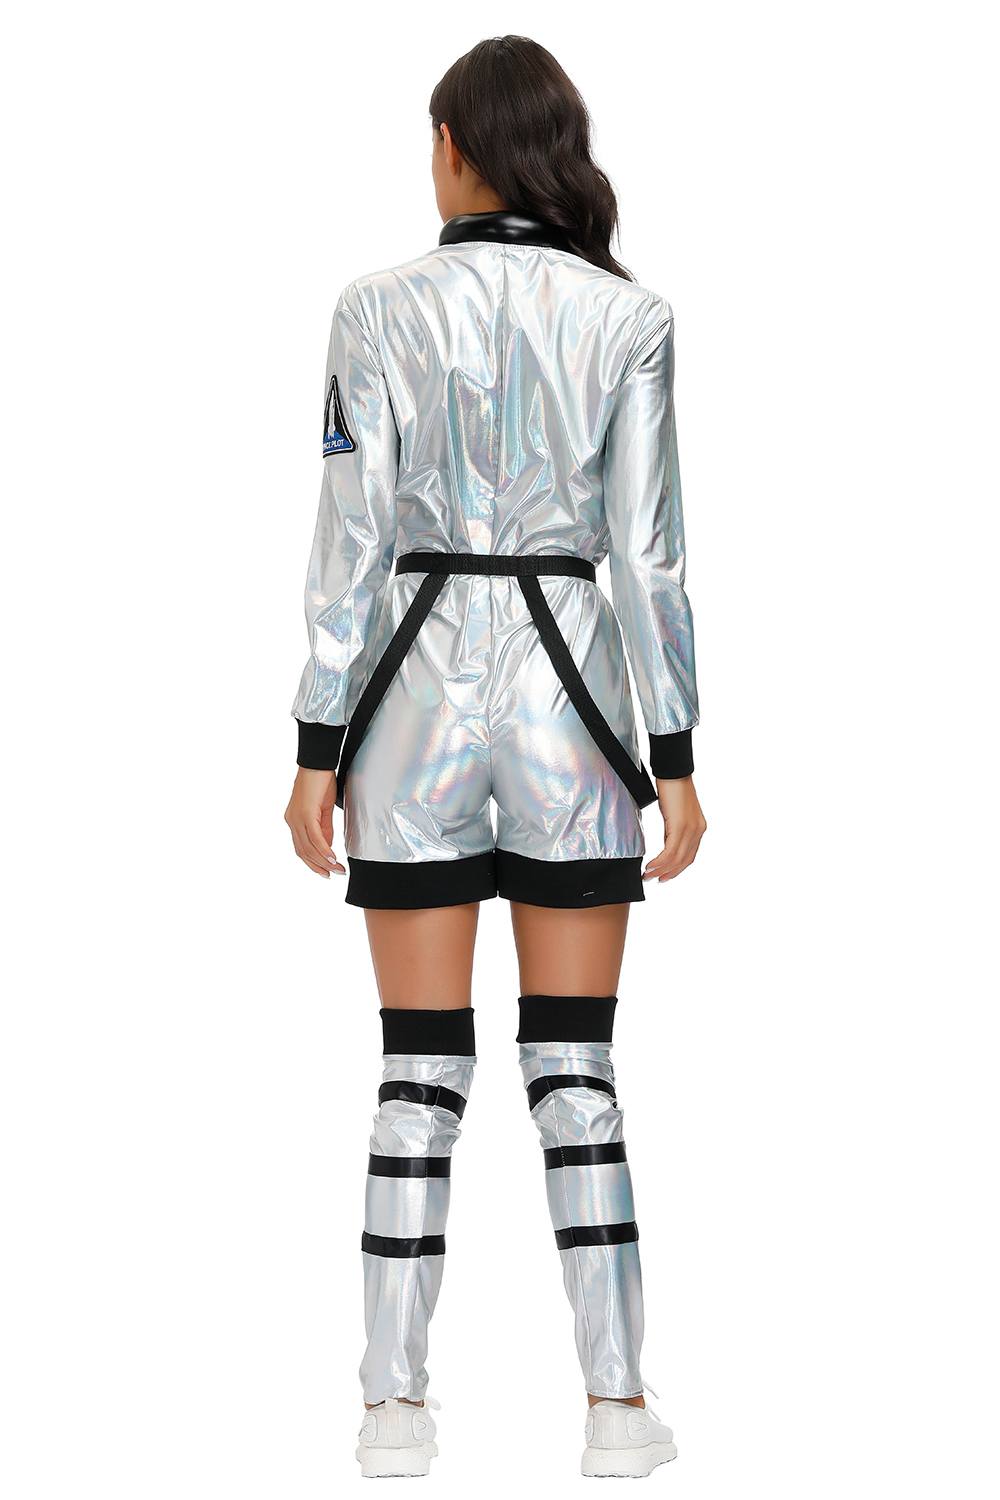 New Arrival Adult Astronaut Space Jumpsuit Halloween Cosplay